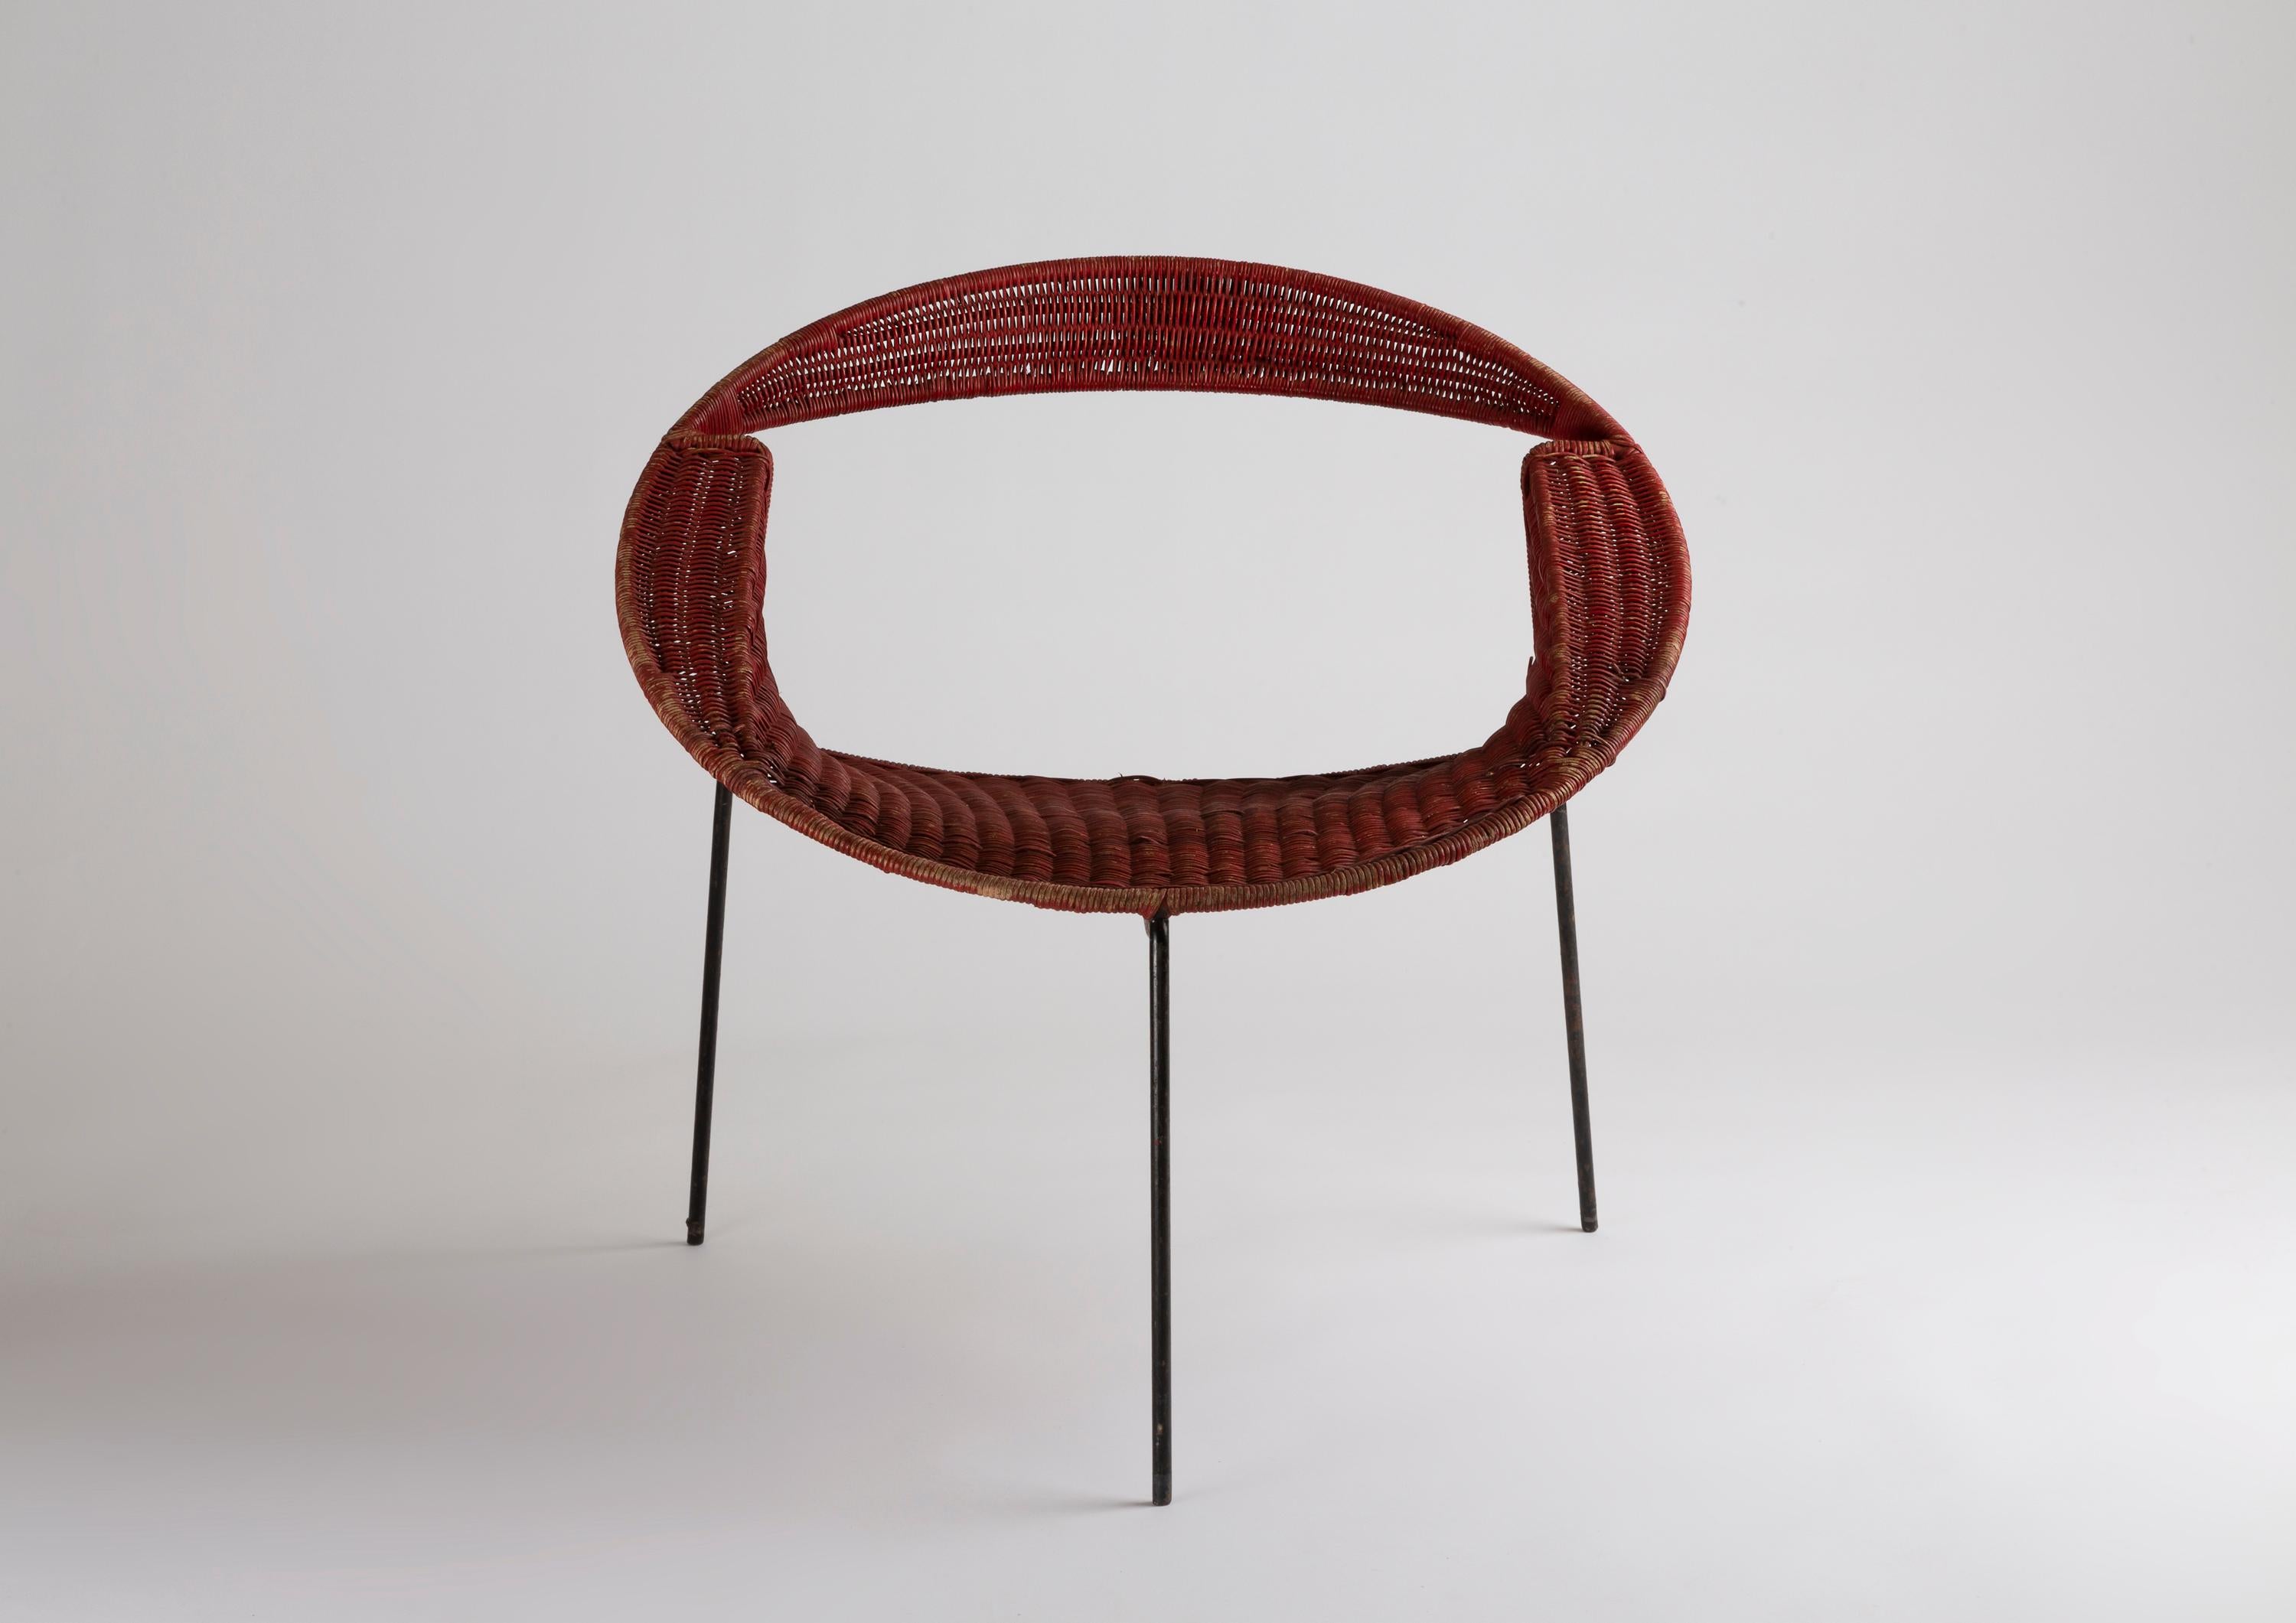 A pair of tripod armchairs by Maurizio Tempestini, in black lacquered metal and red patinated rattan, manufactured by Salterini, Italy, circa 1955.